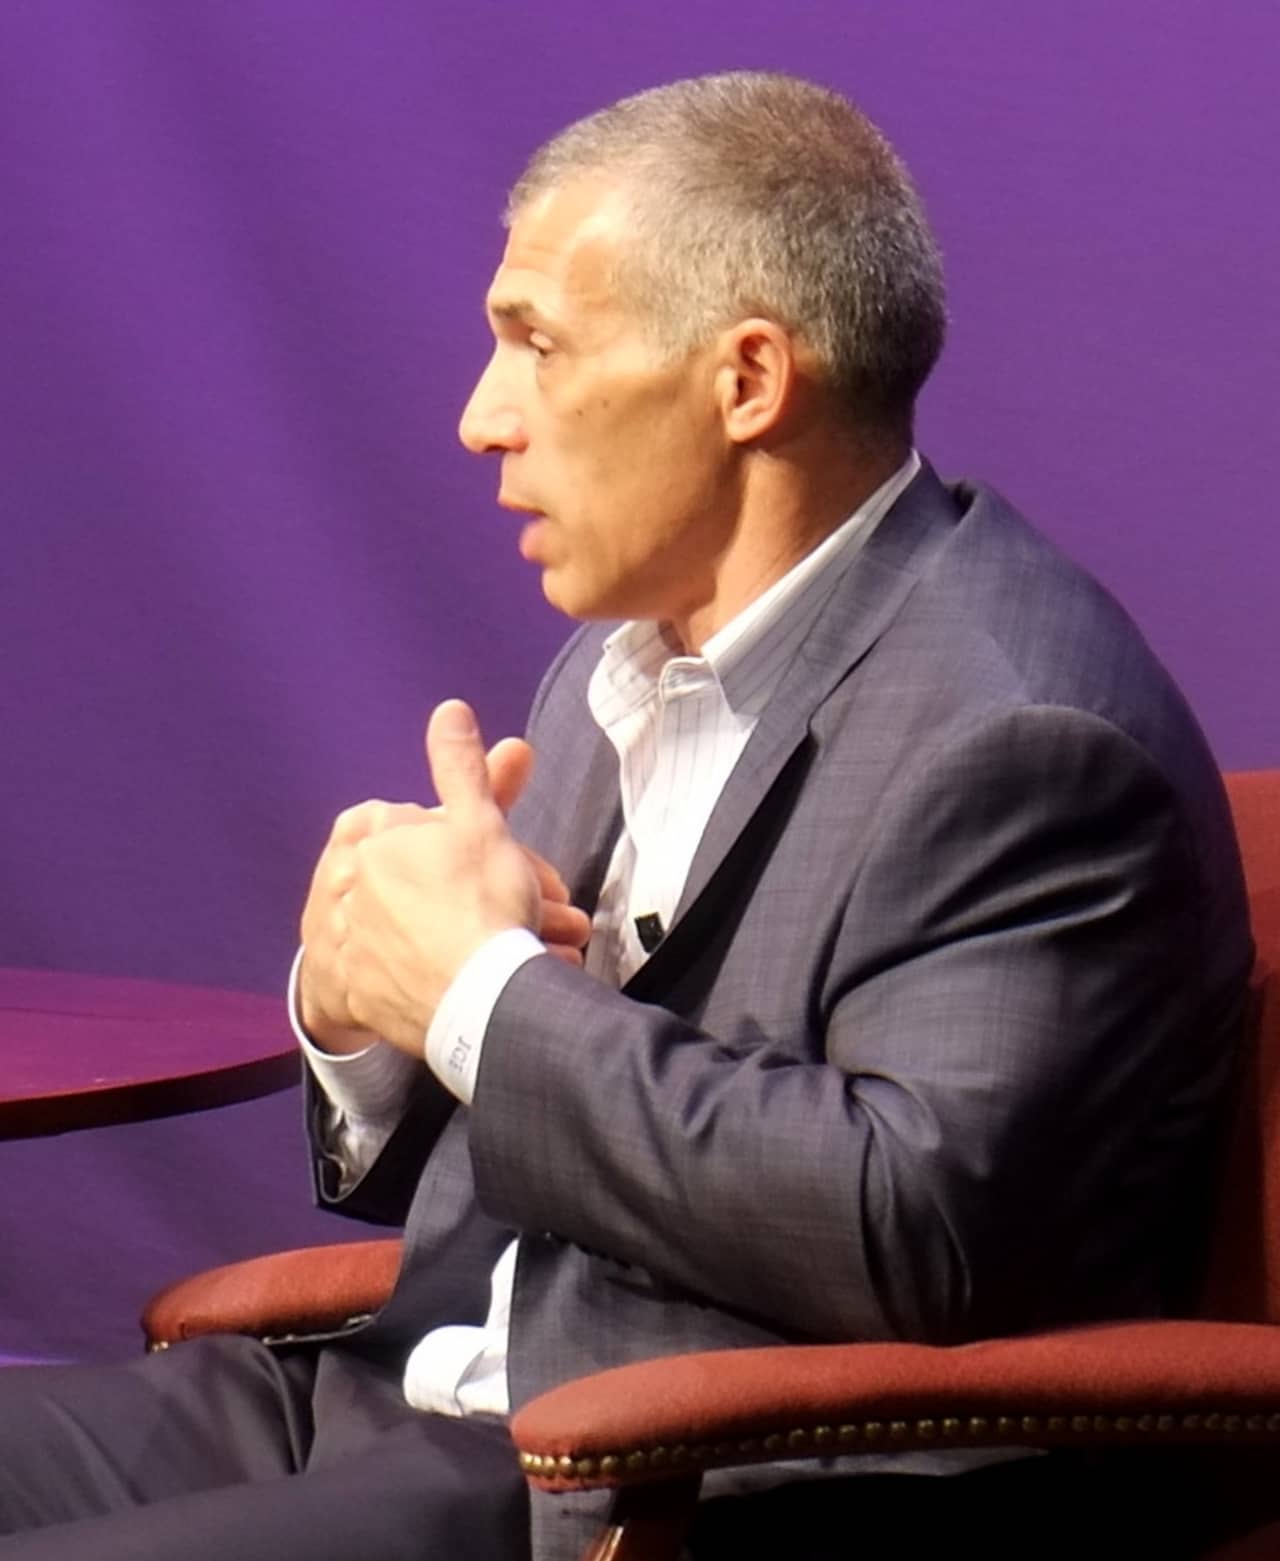 Westchester resident and now ex-Yankees manager Joe Girardi played 15 seasons in the MLB, including three with the Yankees.